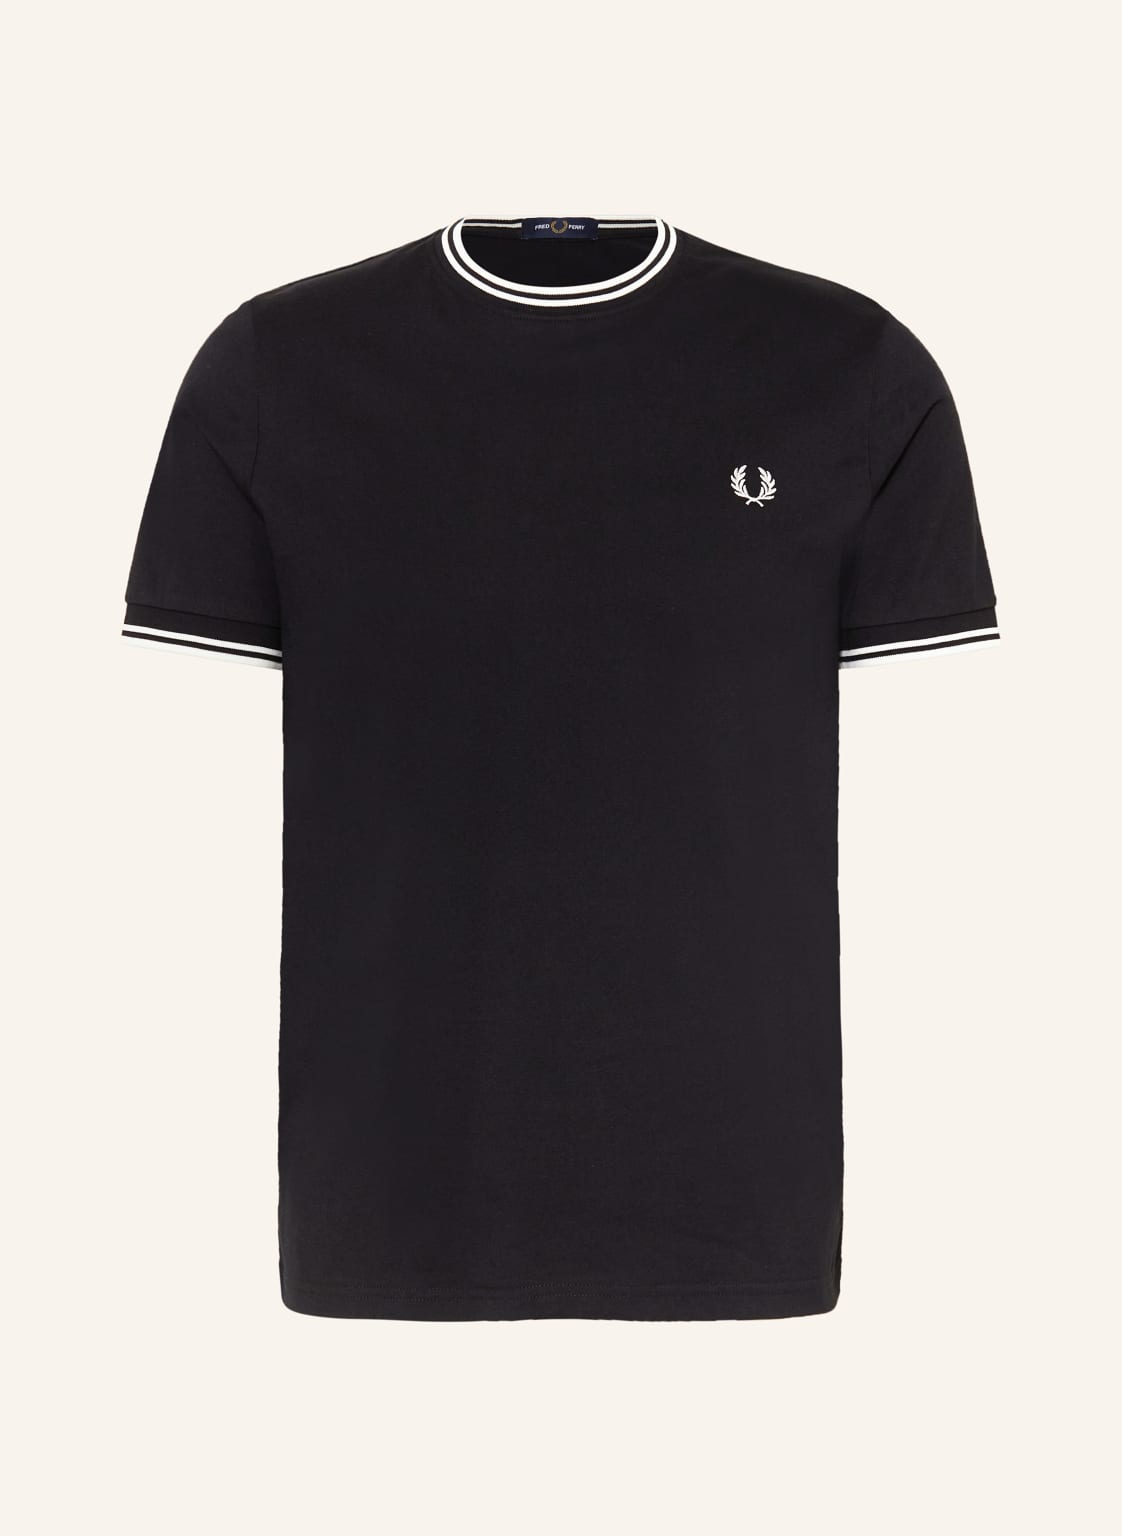 Fred Perry T-Shirt m1588 schwarz von Fred Perry